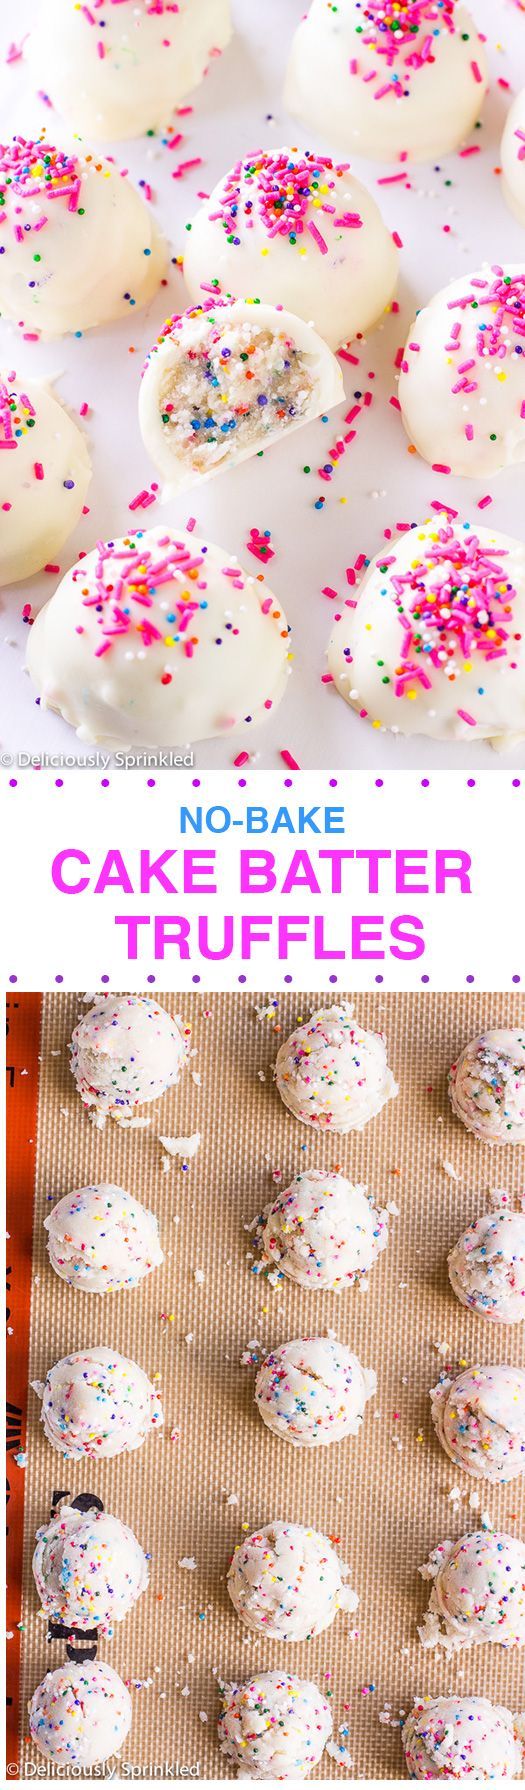 No-Bake Cake Batter Truffles – Perfect dessert for the summer months when it’s too hot to turn on the ov